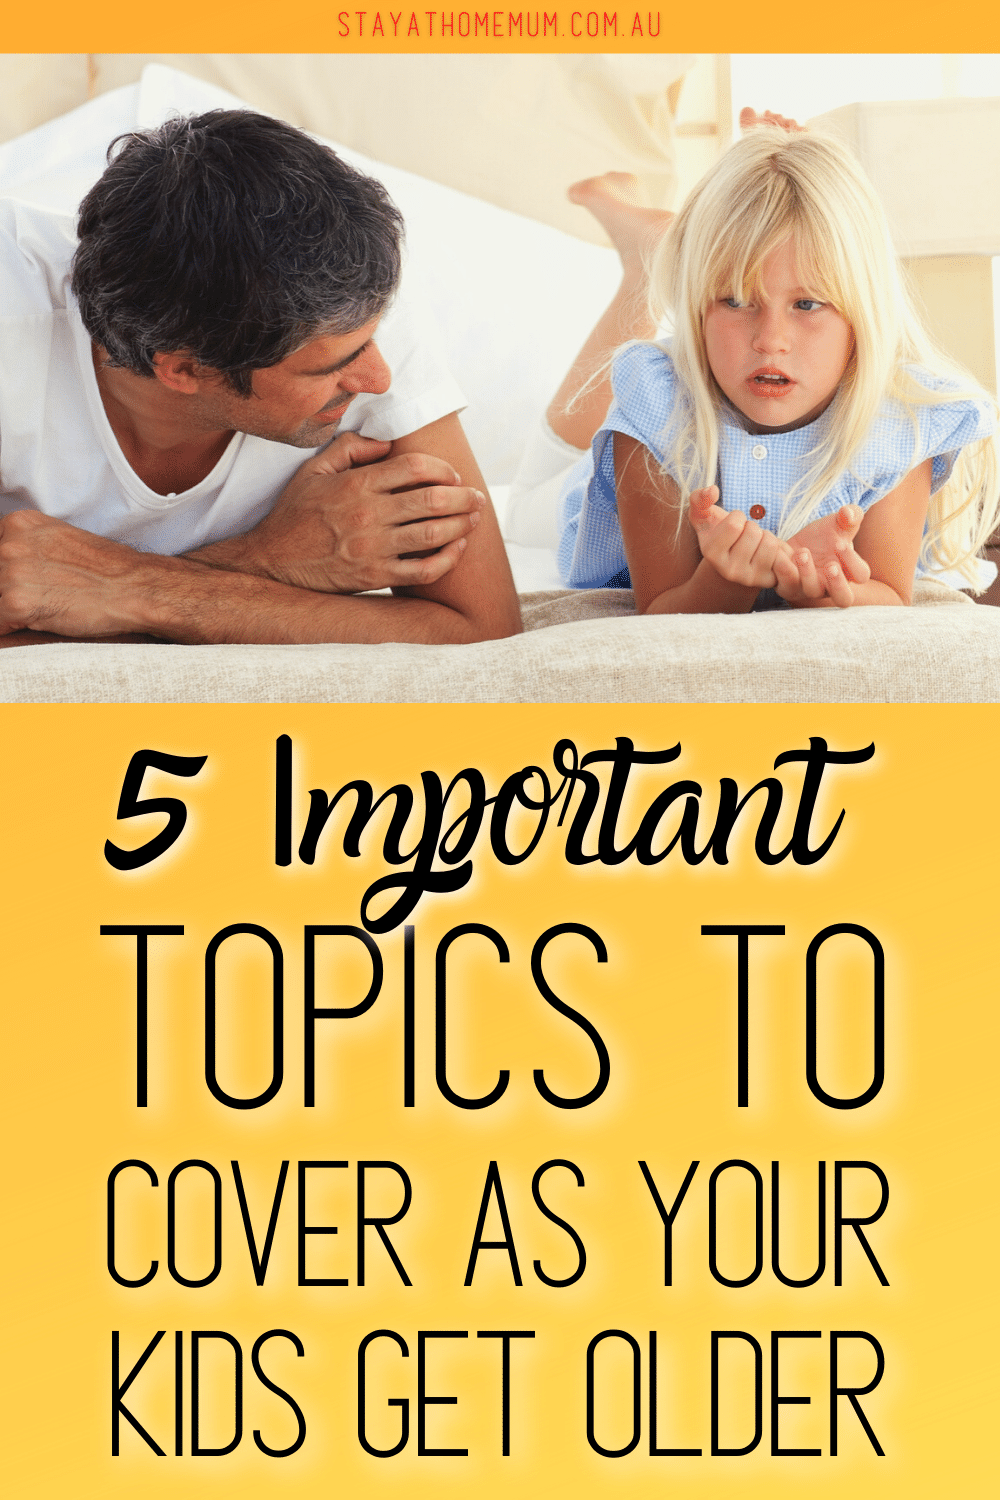 5 Important Topics to Cover As Your Kids Get Older | Stay At Home Mum